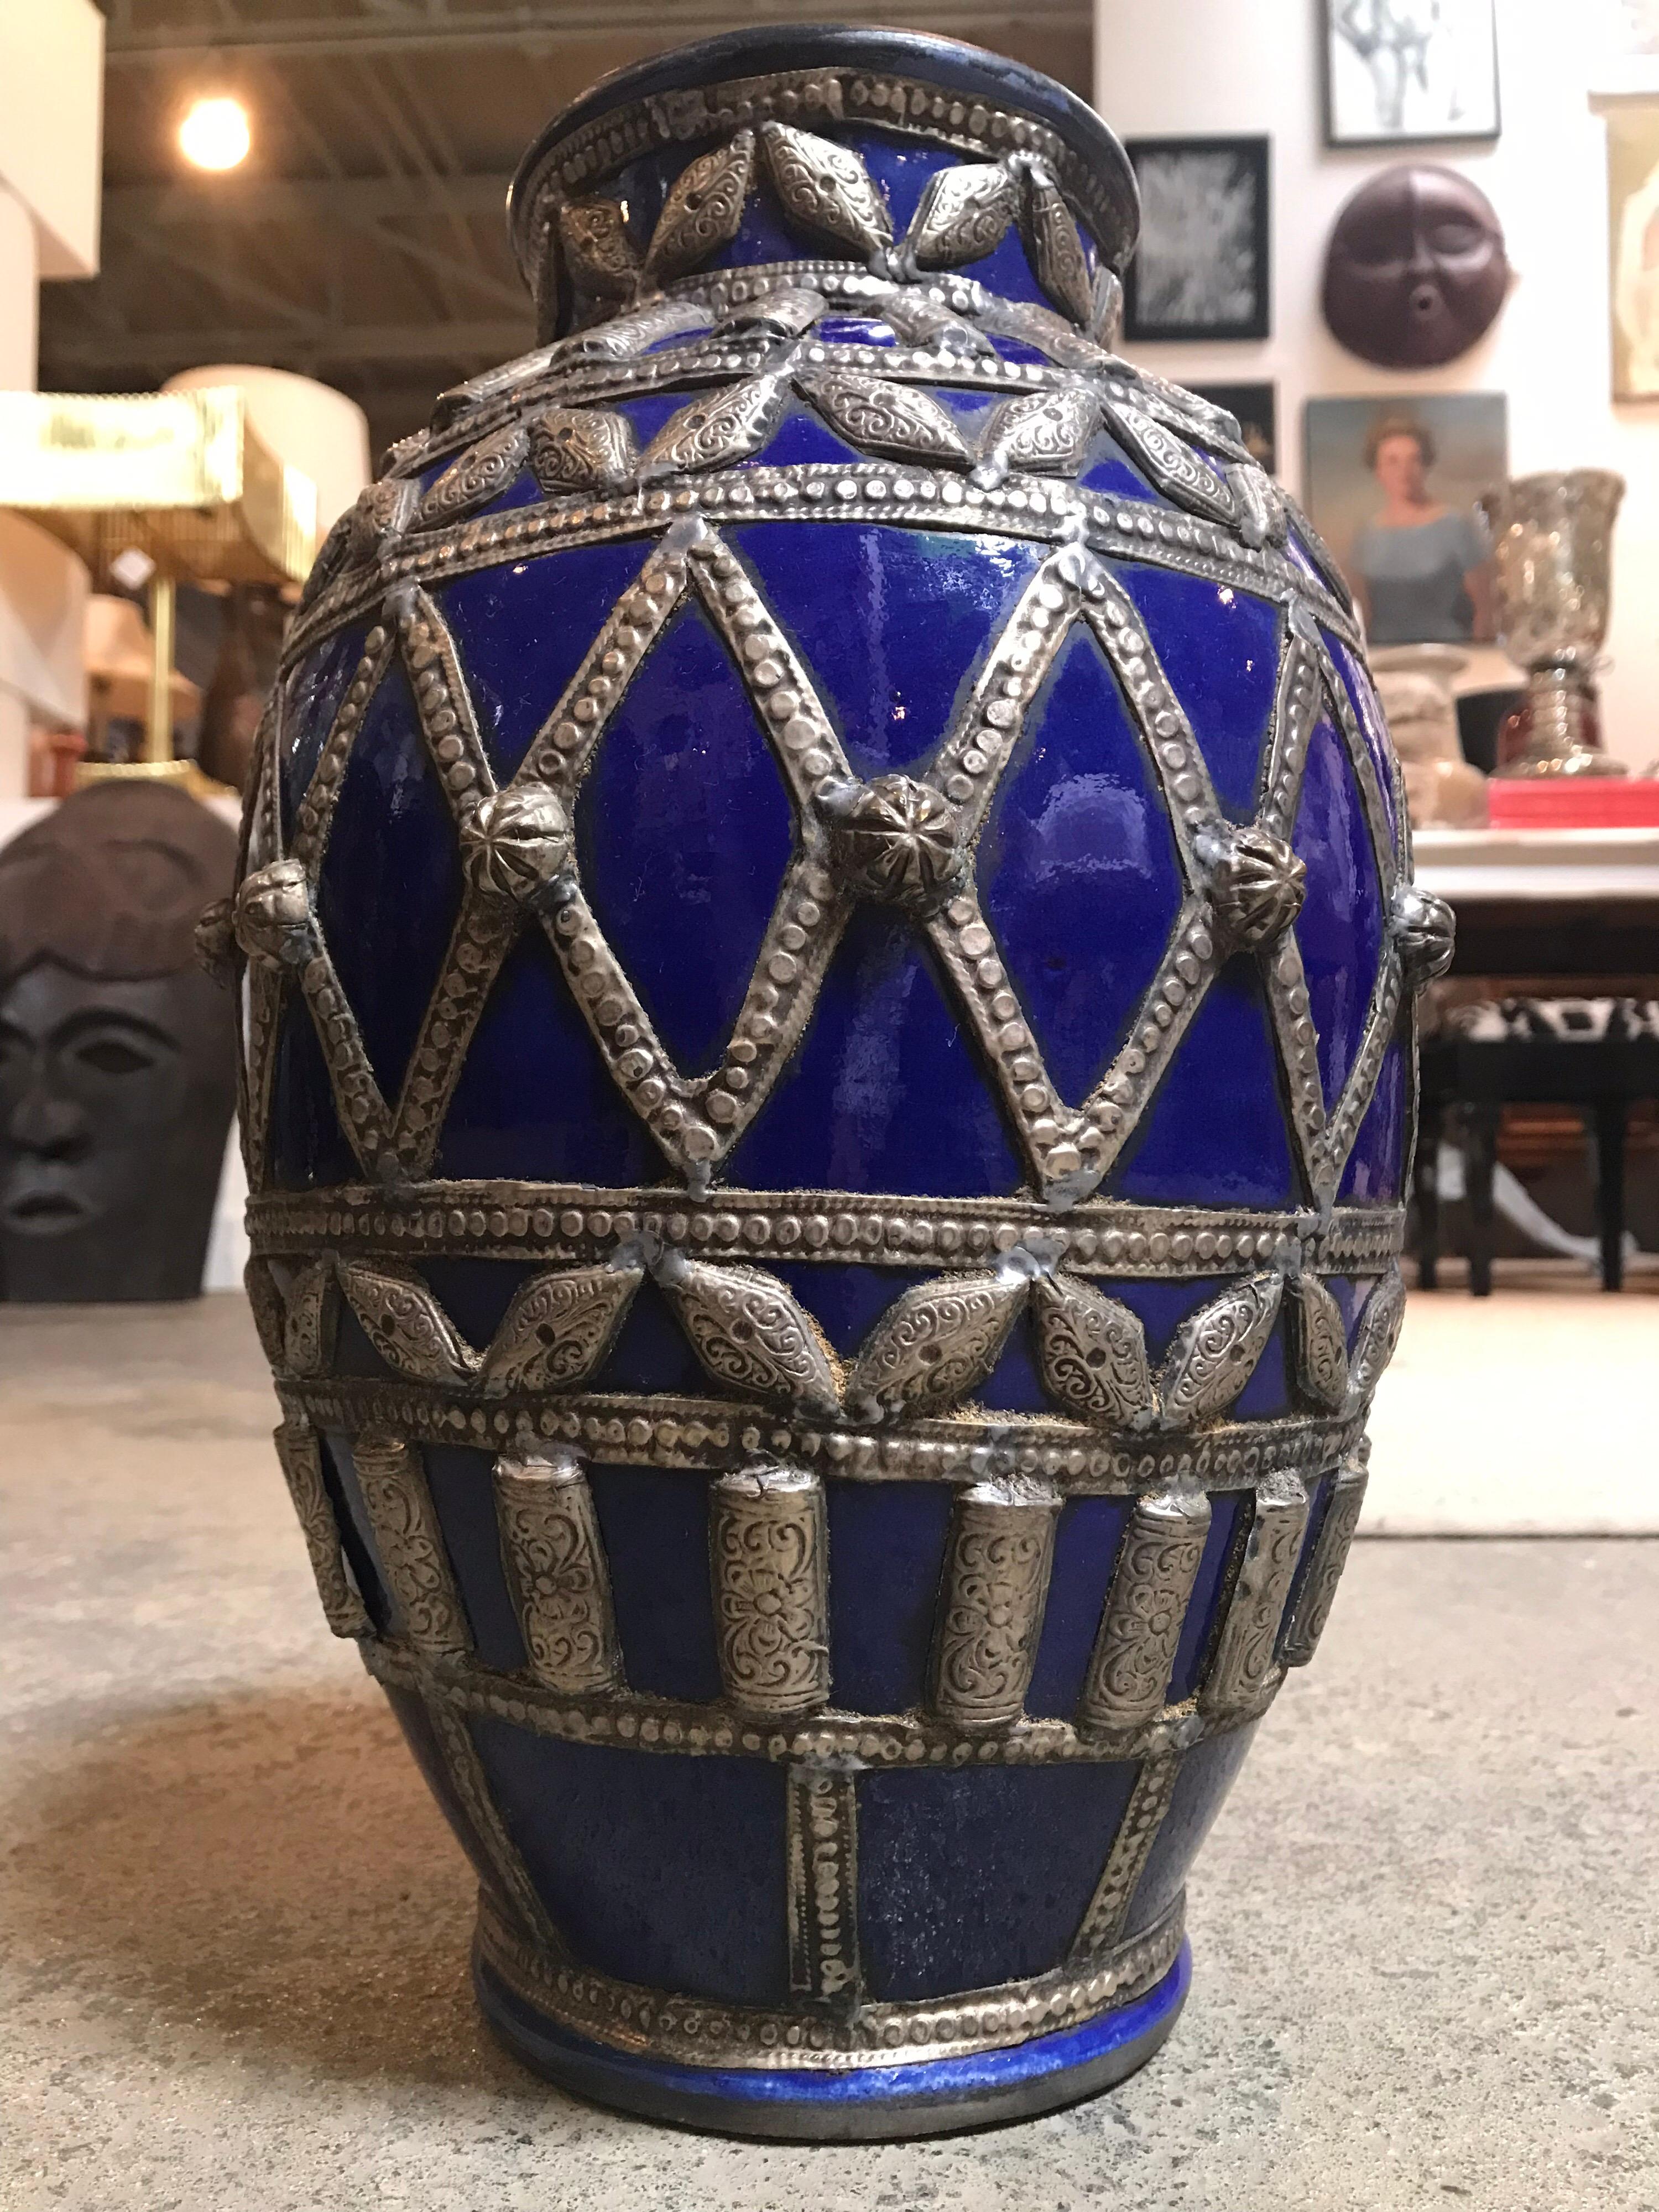 This larger, dark blue Moroccan pot is hand painted and has a ceramic glaze. It is decorated with various ribbons of silver-like metal providing round geometric patterns throughout.